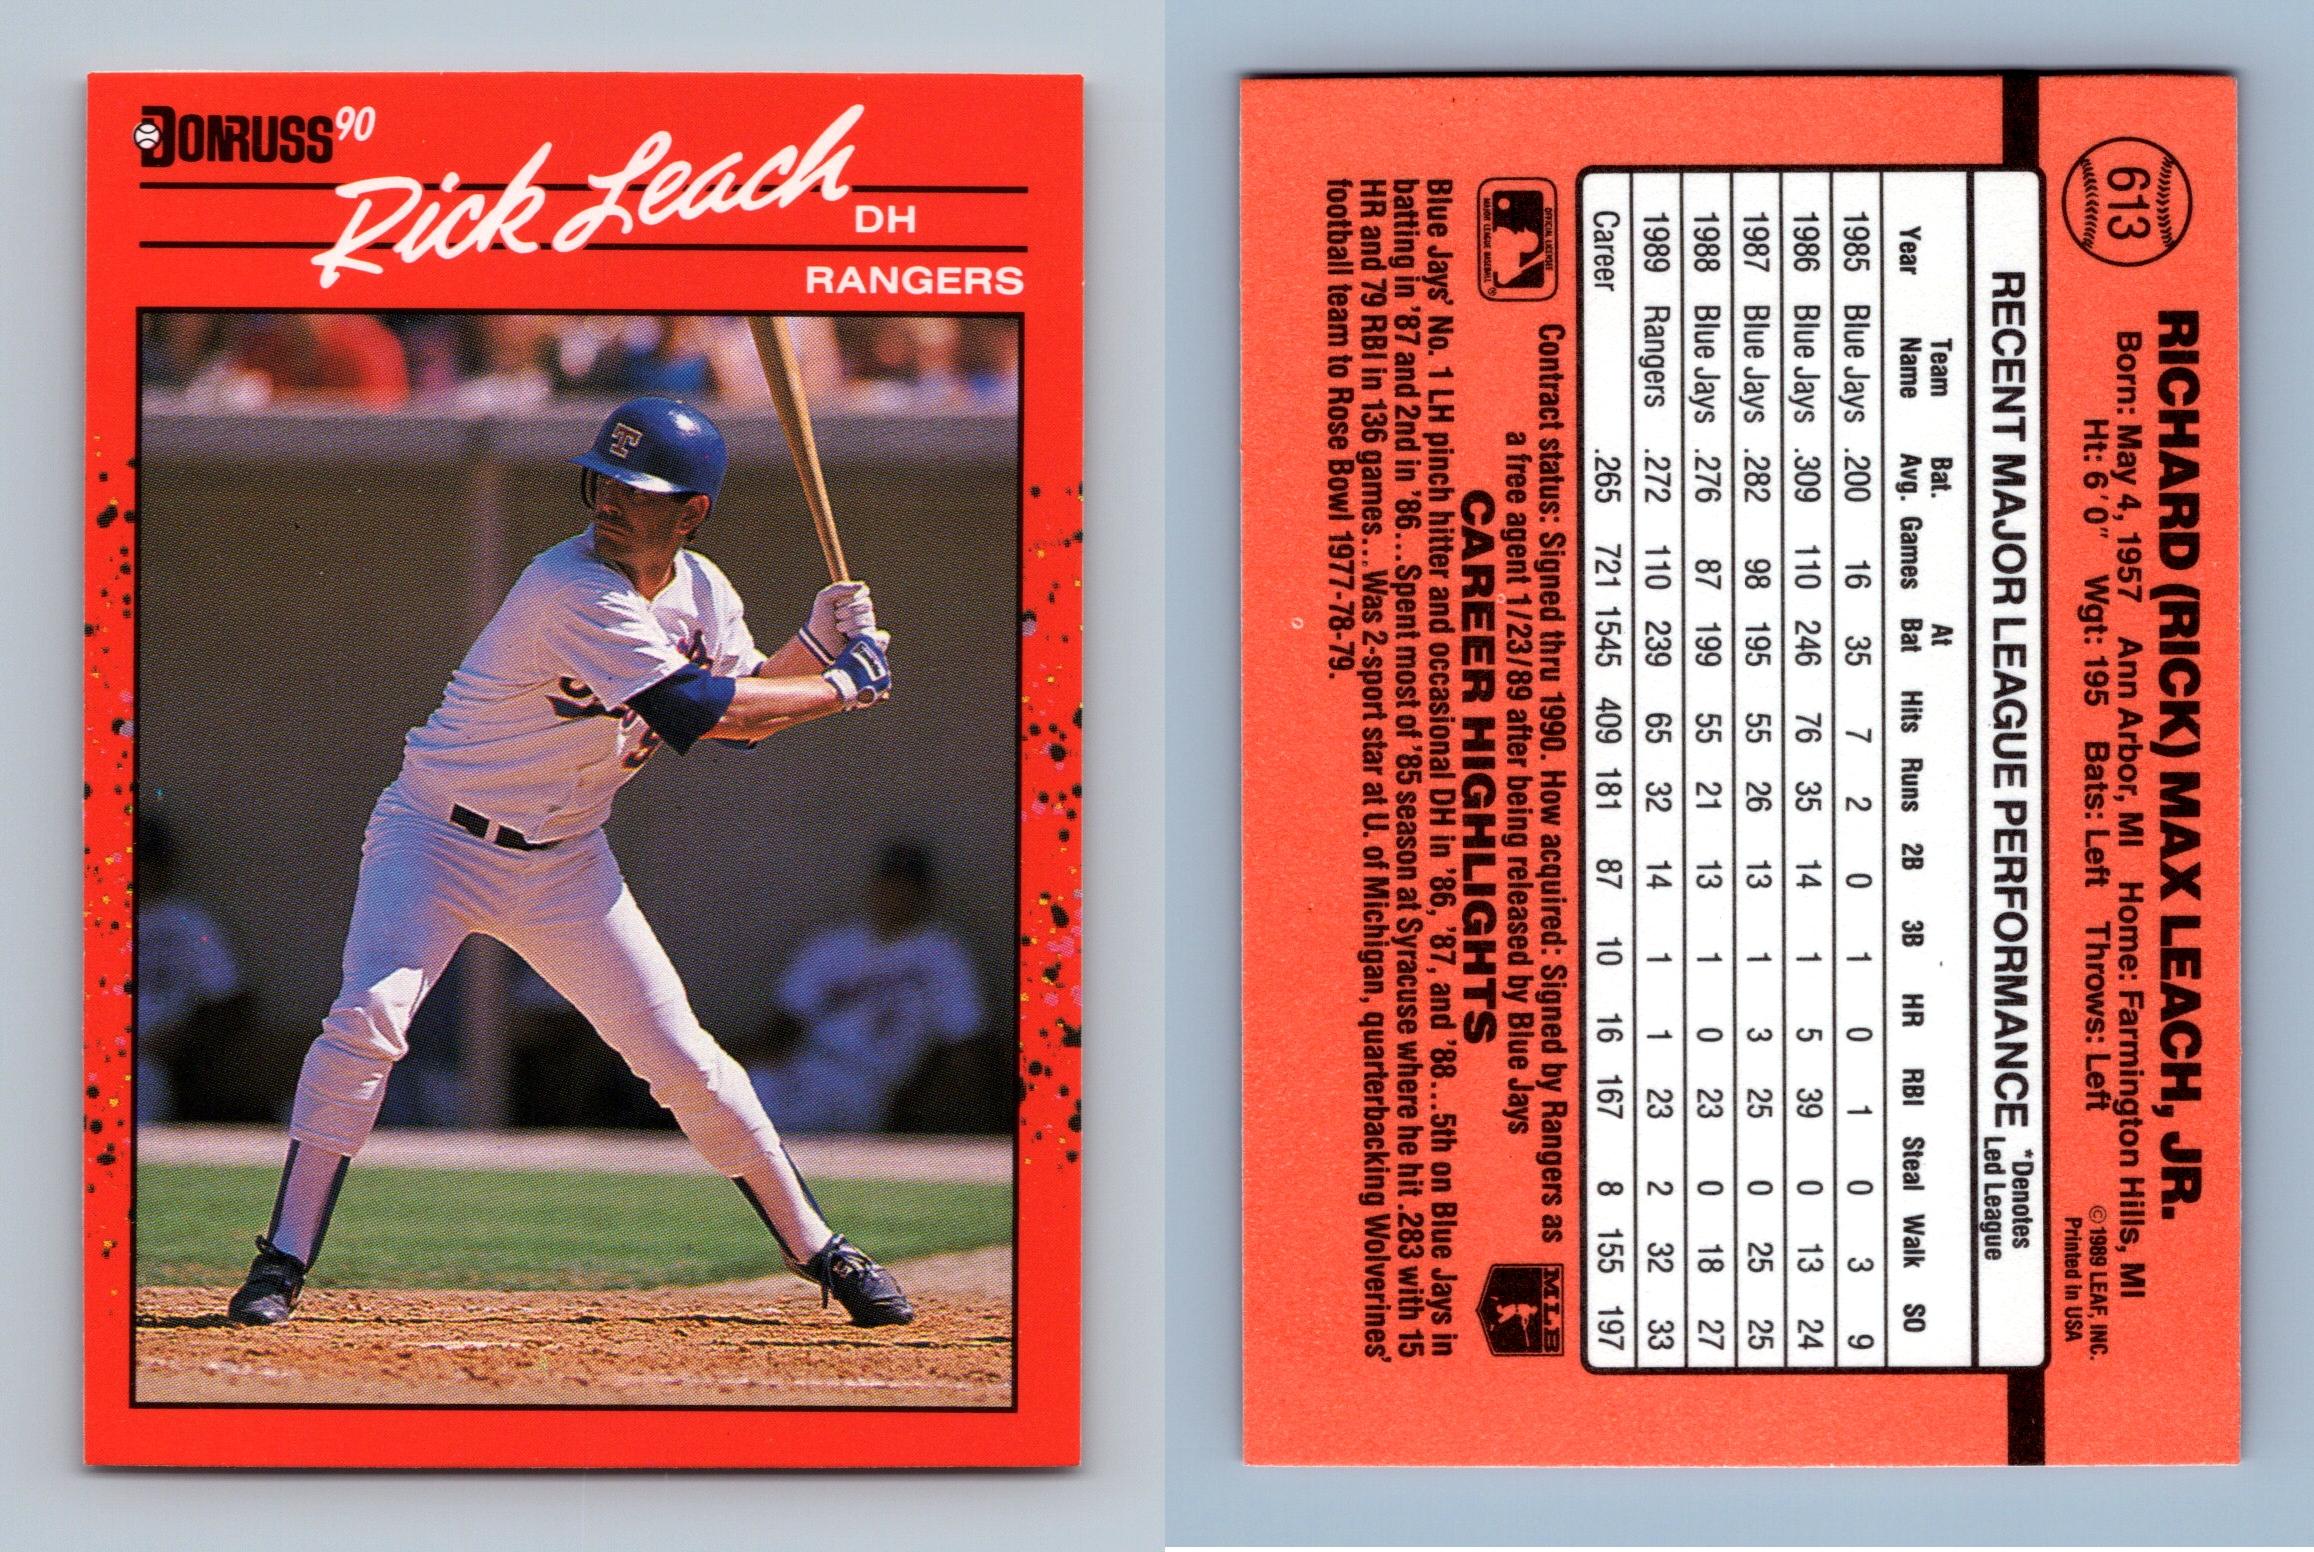 In The Cards: 1990 Medicine Hat Blue Jays – TALES OF BASEBALL